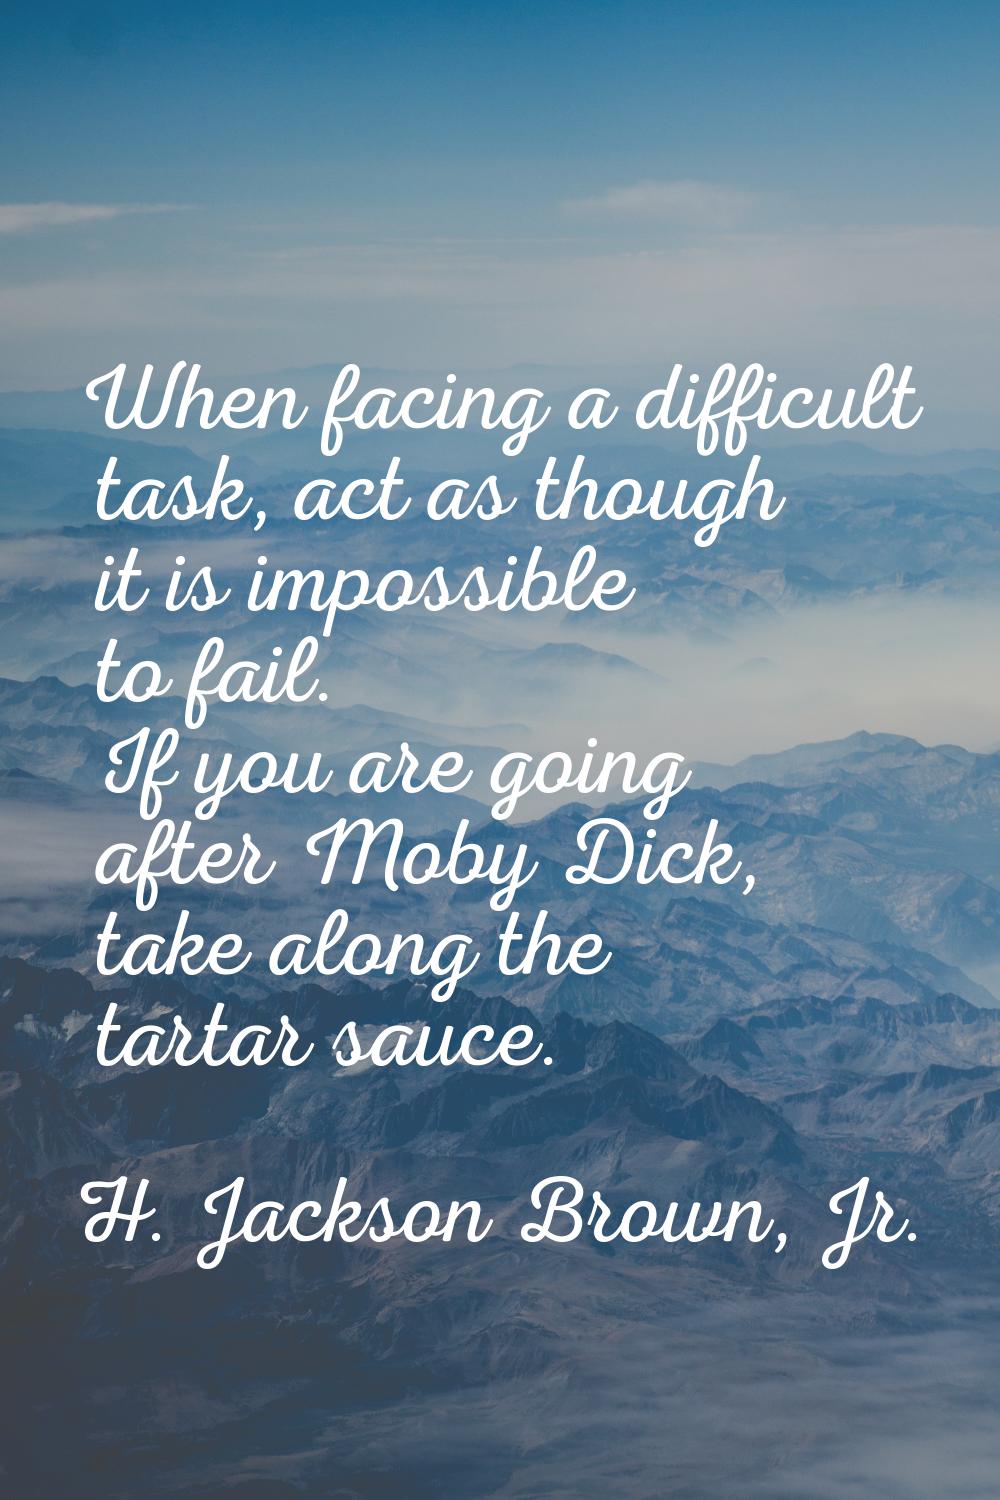 When facing a difficult task, act as though it is impossible to fail. If you are going after Moby D